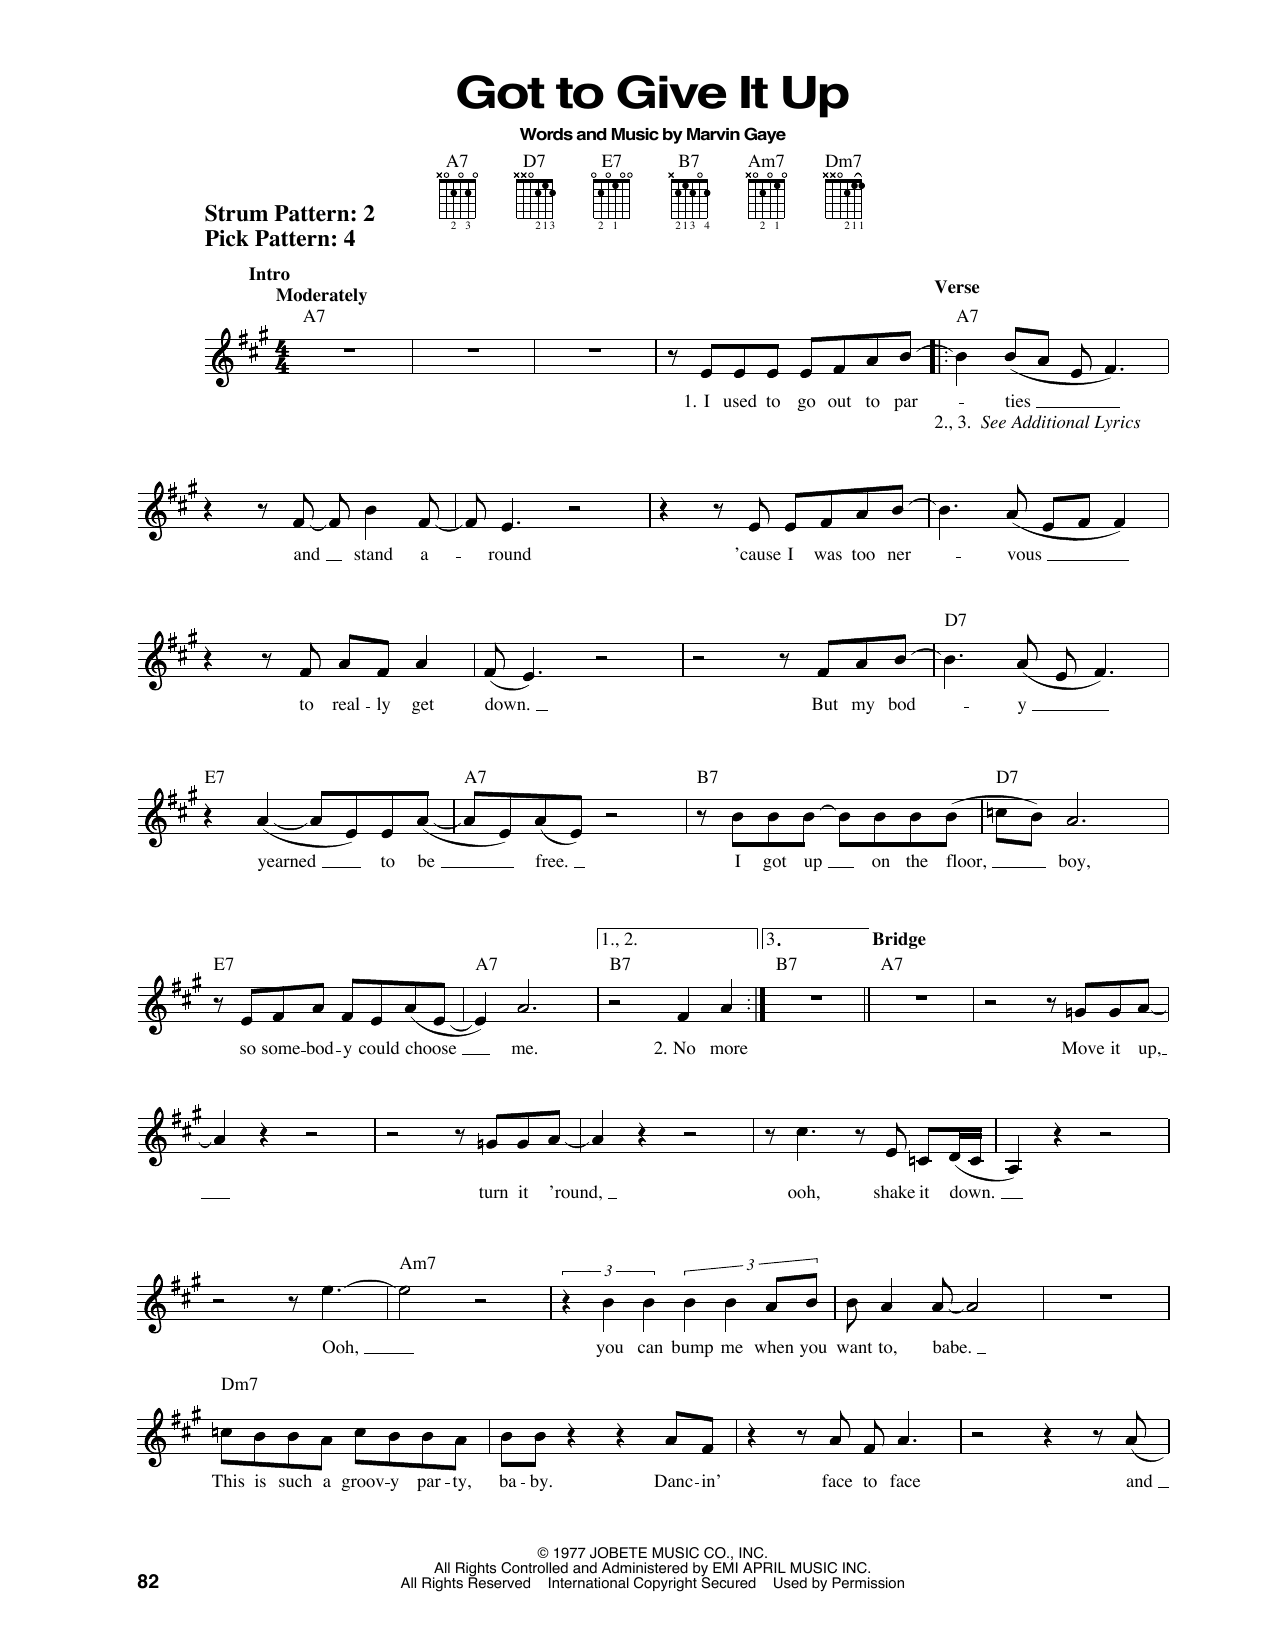 Download Marvin Gaye Got To Give It Up Sheet Music